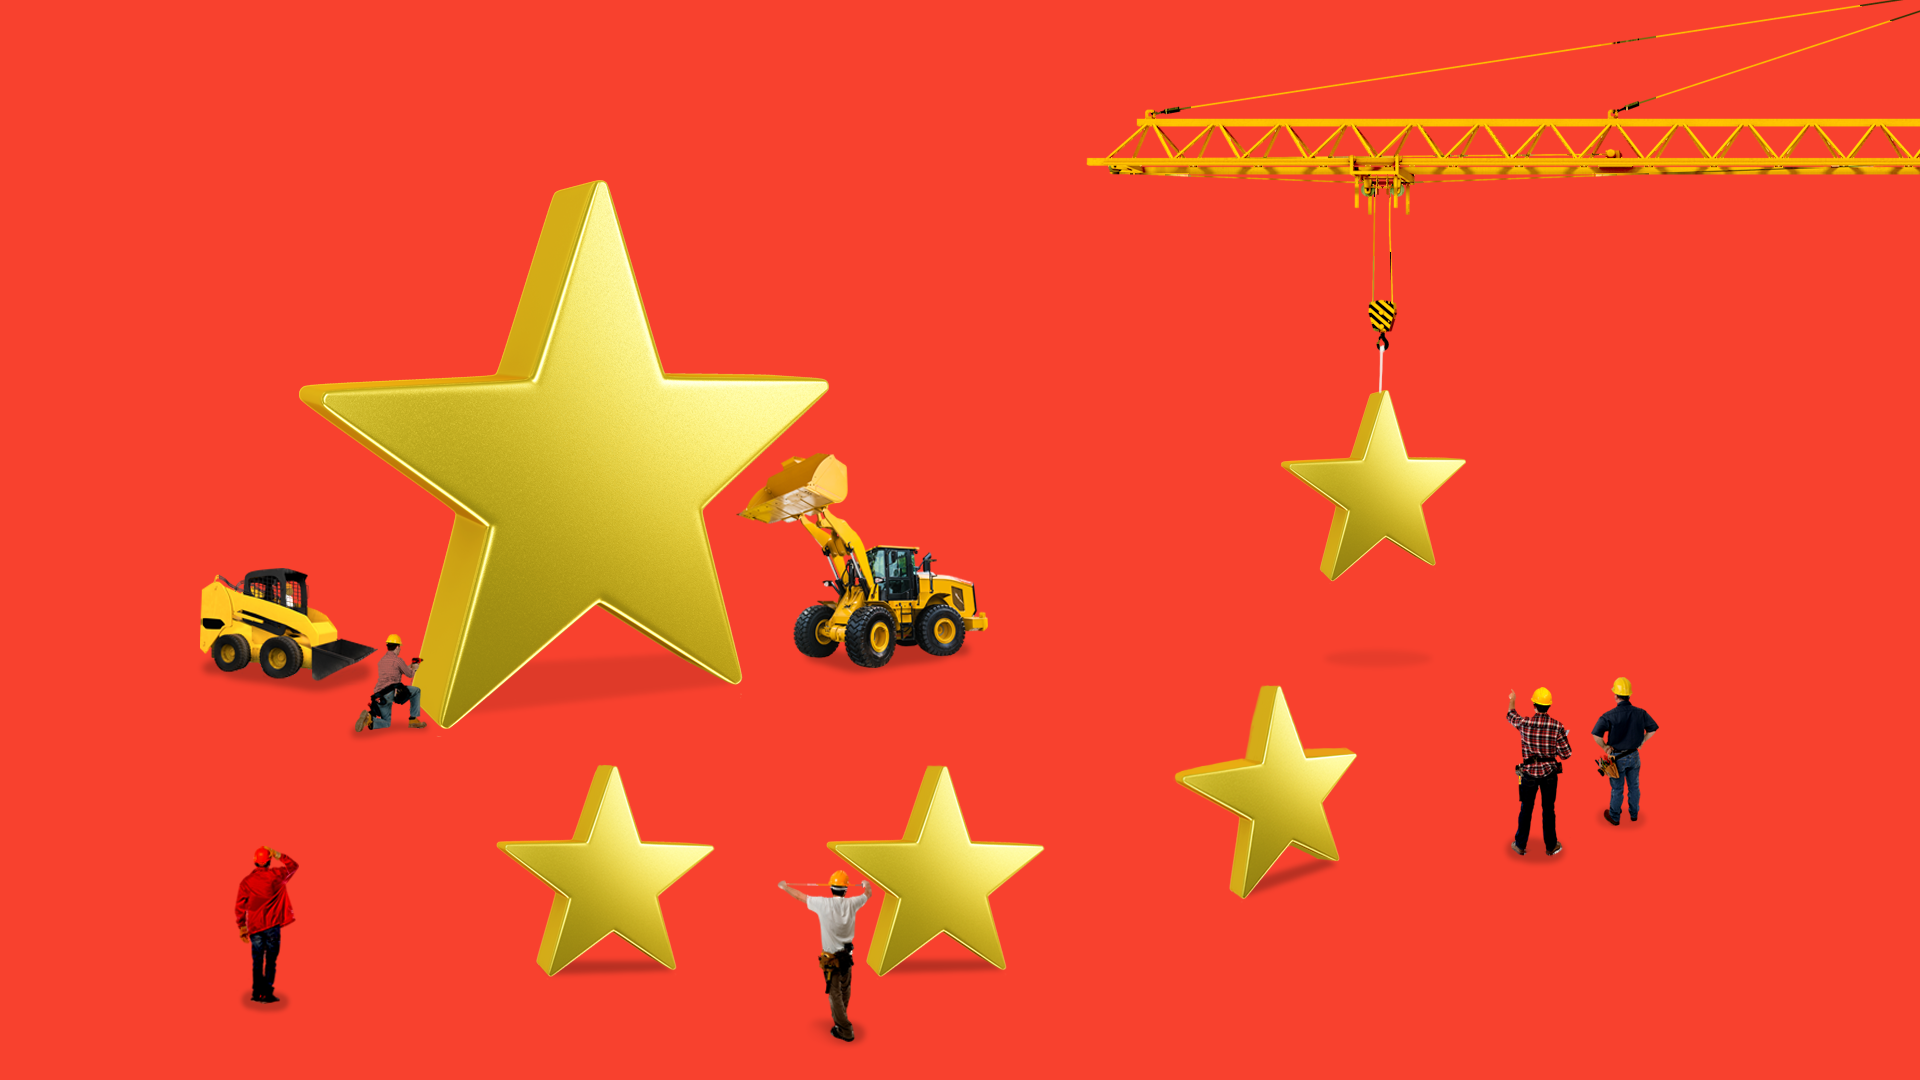 Illustration of the Chinese flag with construction crews working on it